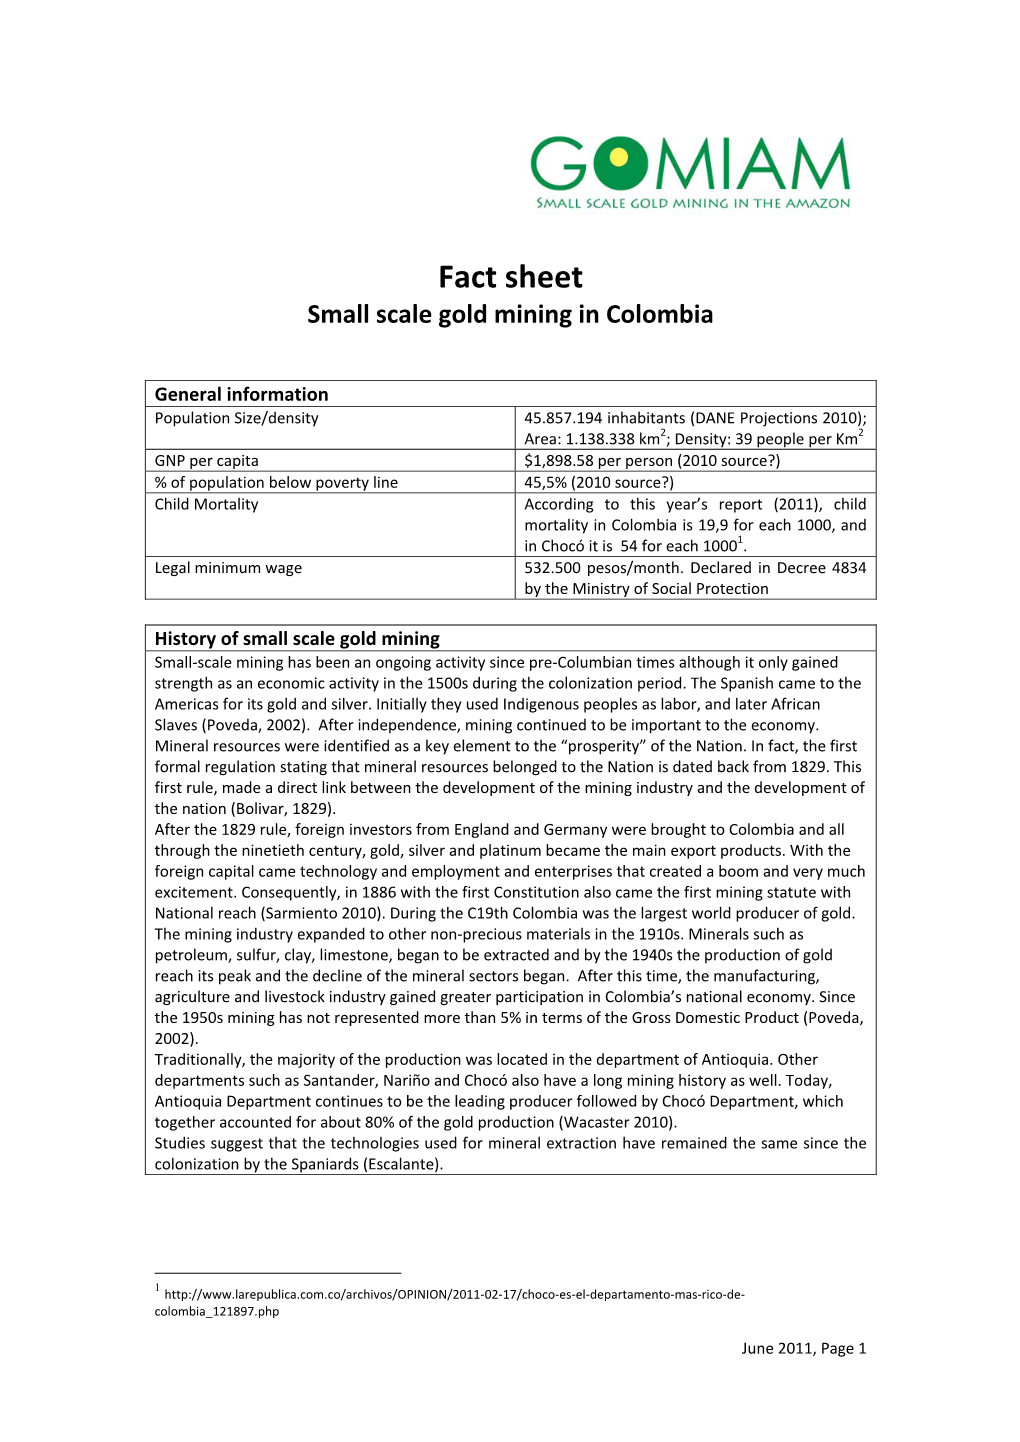 Fact Sheet Small Scale Gold Mining in Colombia